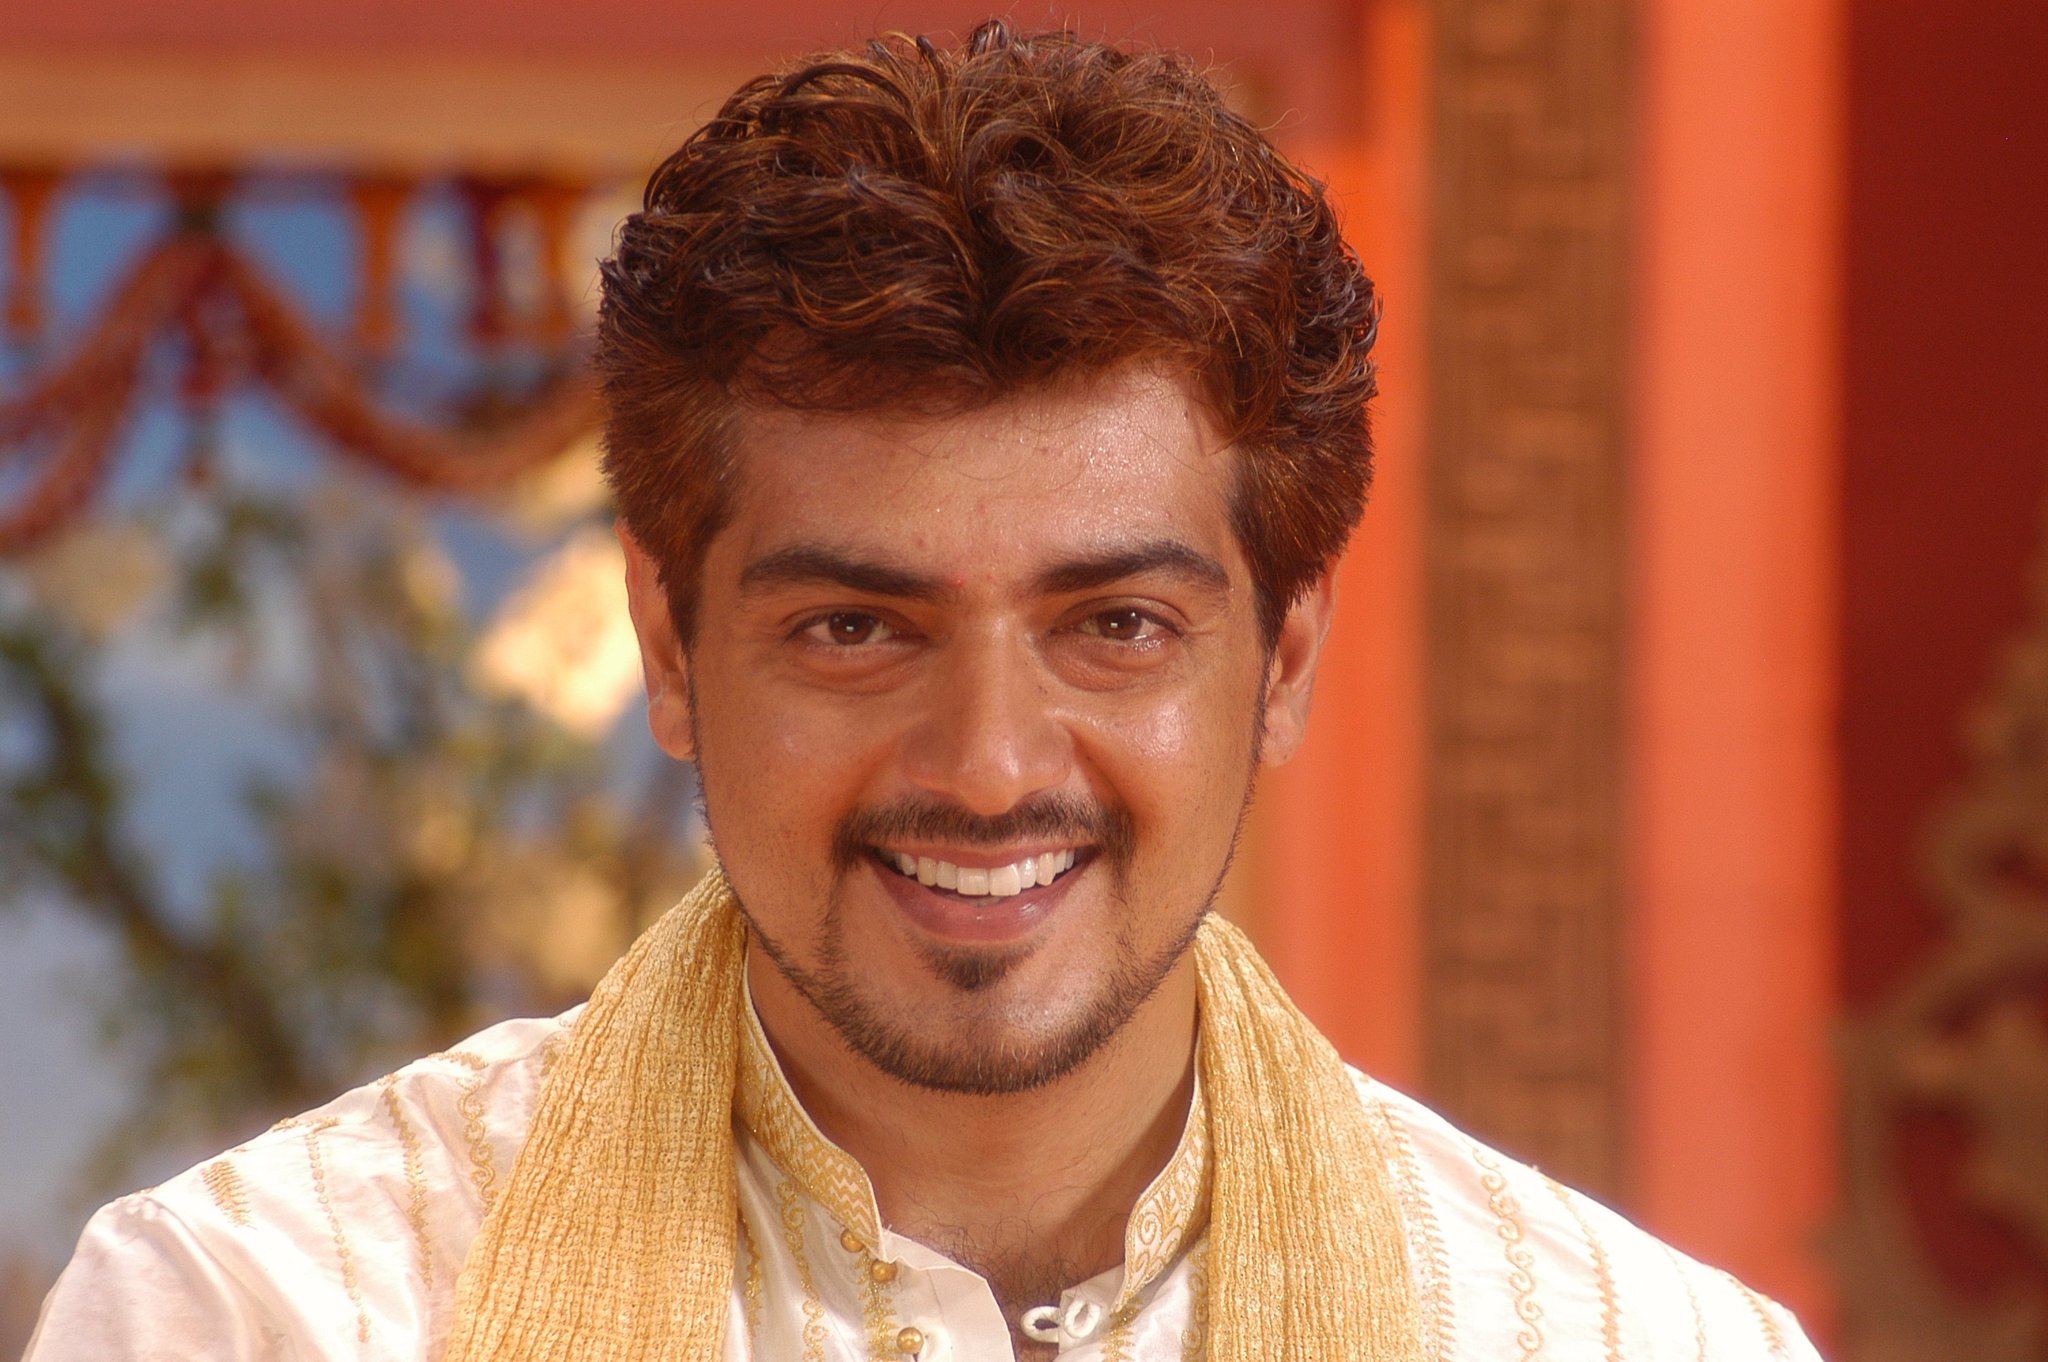 Kollywood super star Ajith Kumar 56th film is THALA and it is beind .....  Continue Reading | Hd photos free download, Hd photos, Dj movie